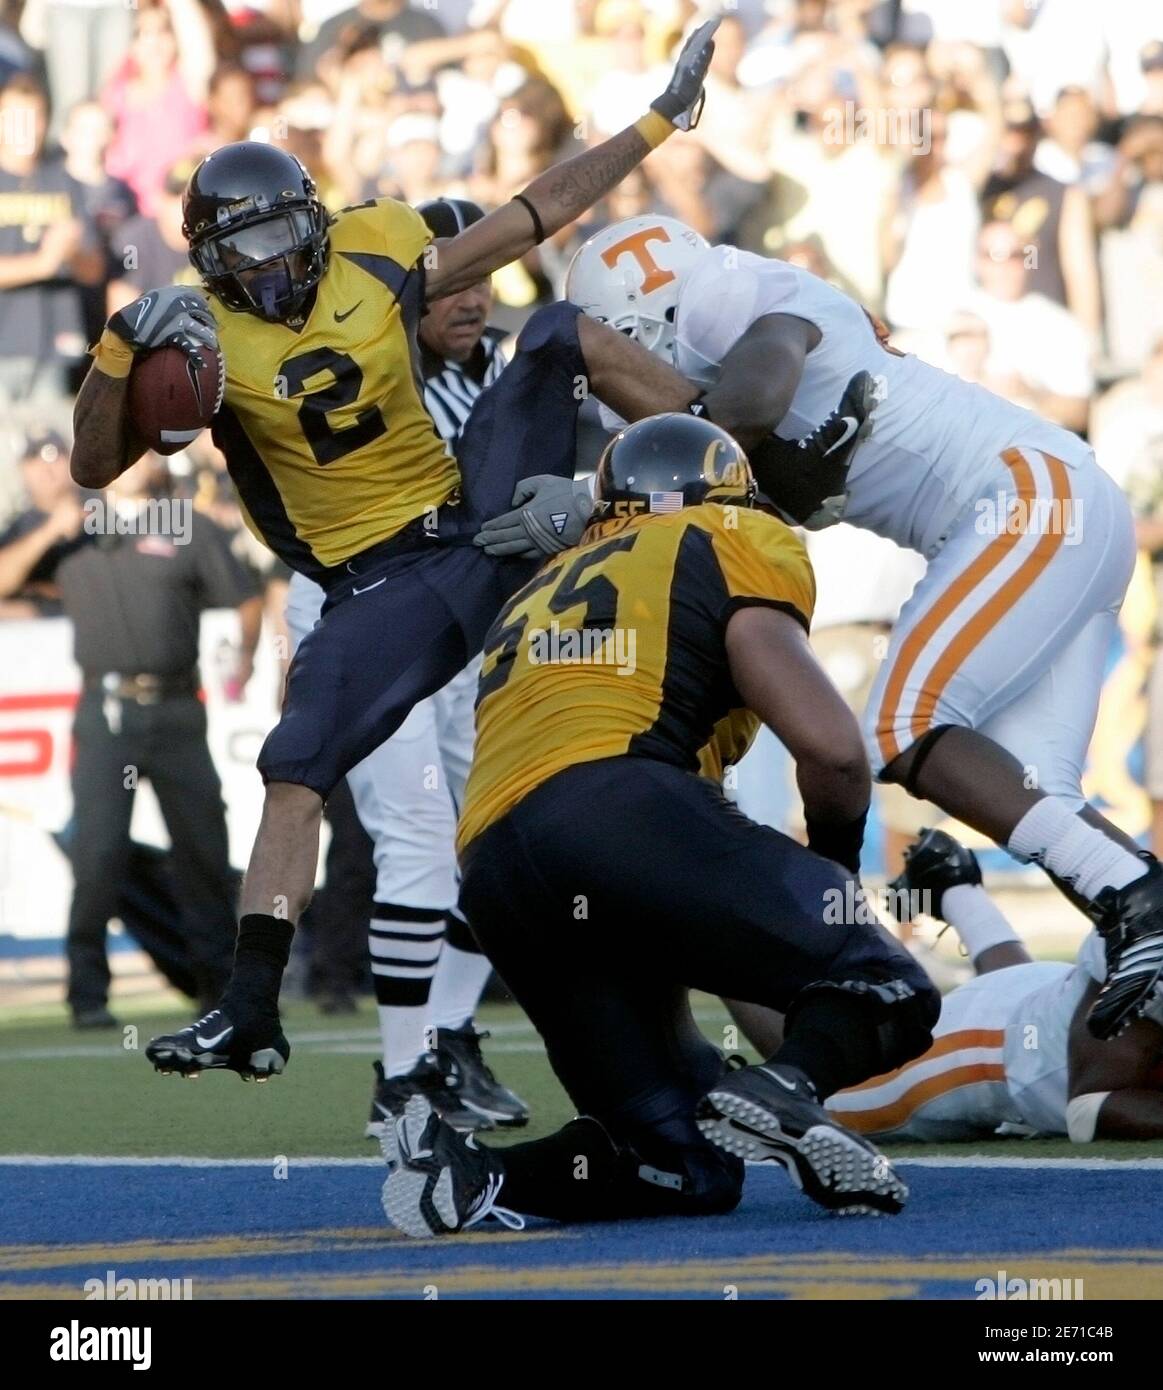 University of California wide receiver Robert Jordan (2) leaps into the end  zone for a second quarter touchdown against the University of Tennessee  during their NCAA Division college football game in Berkeley,